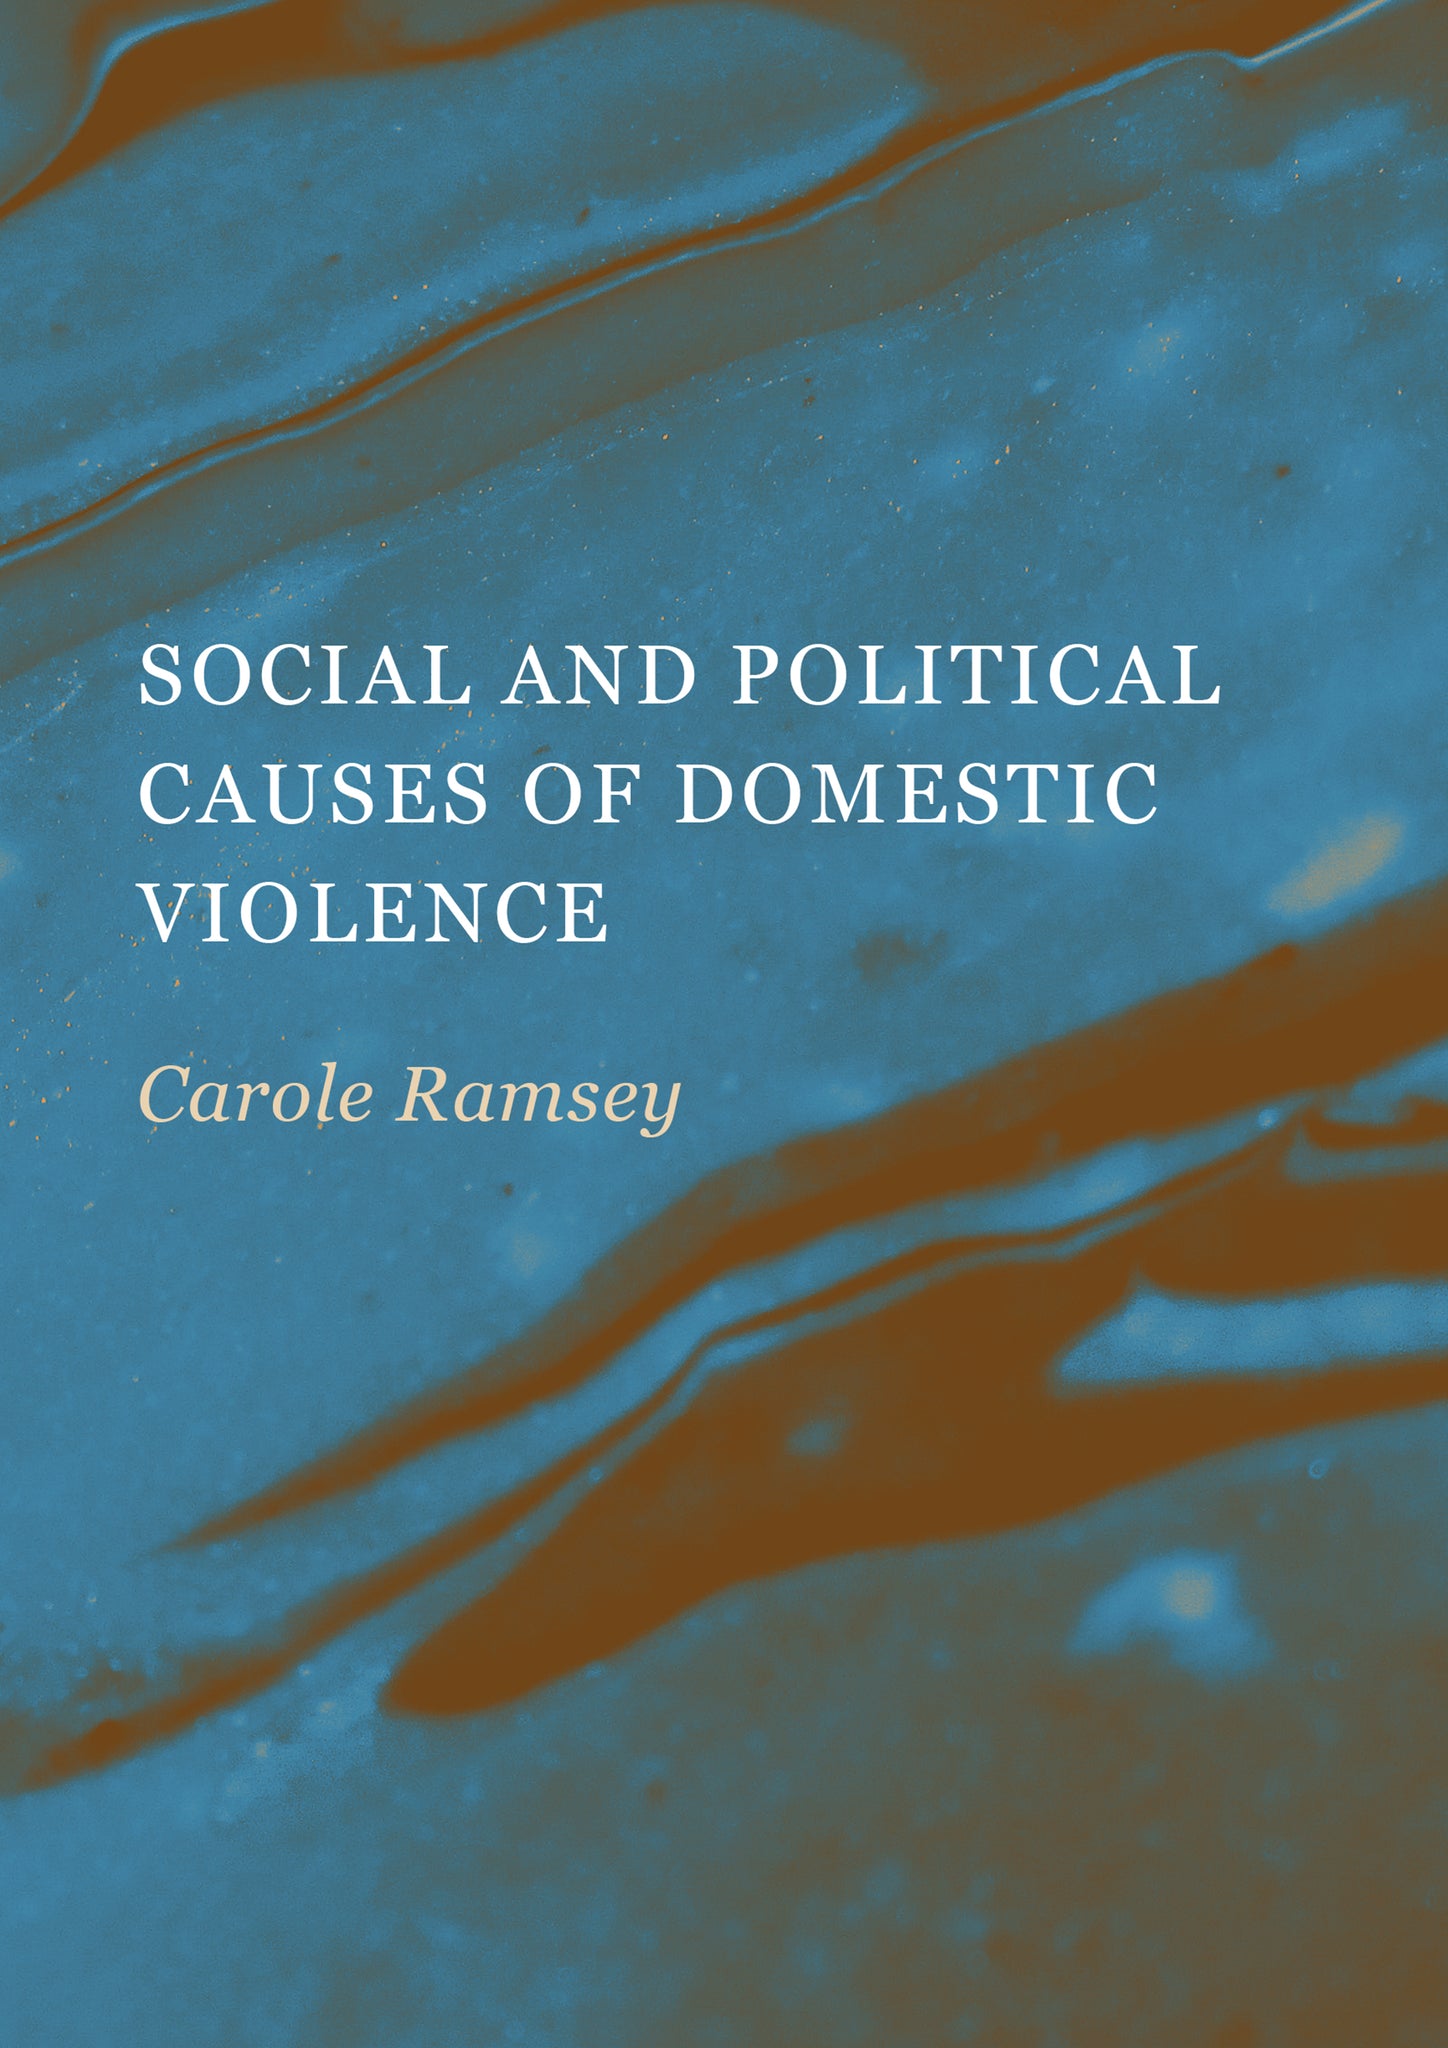 Social and Political Causes of Domestic Violence: A Genealogy